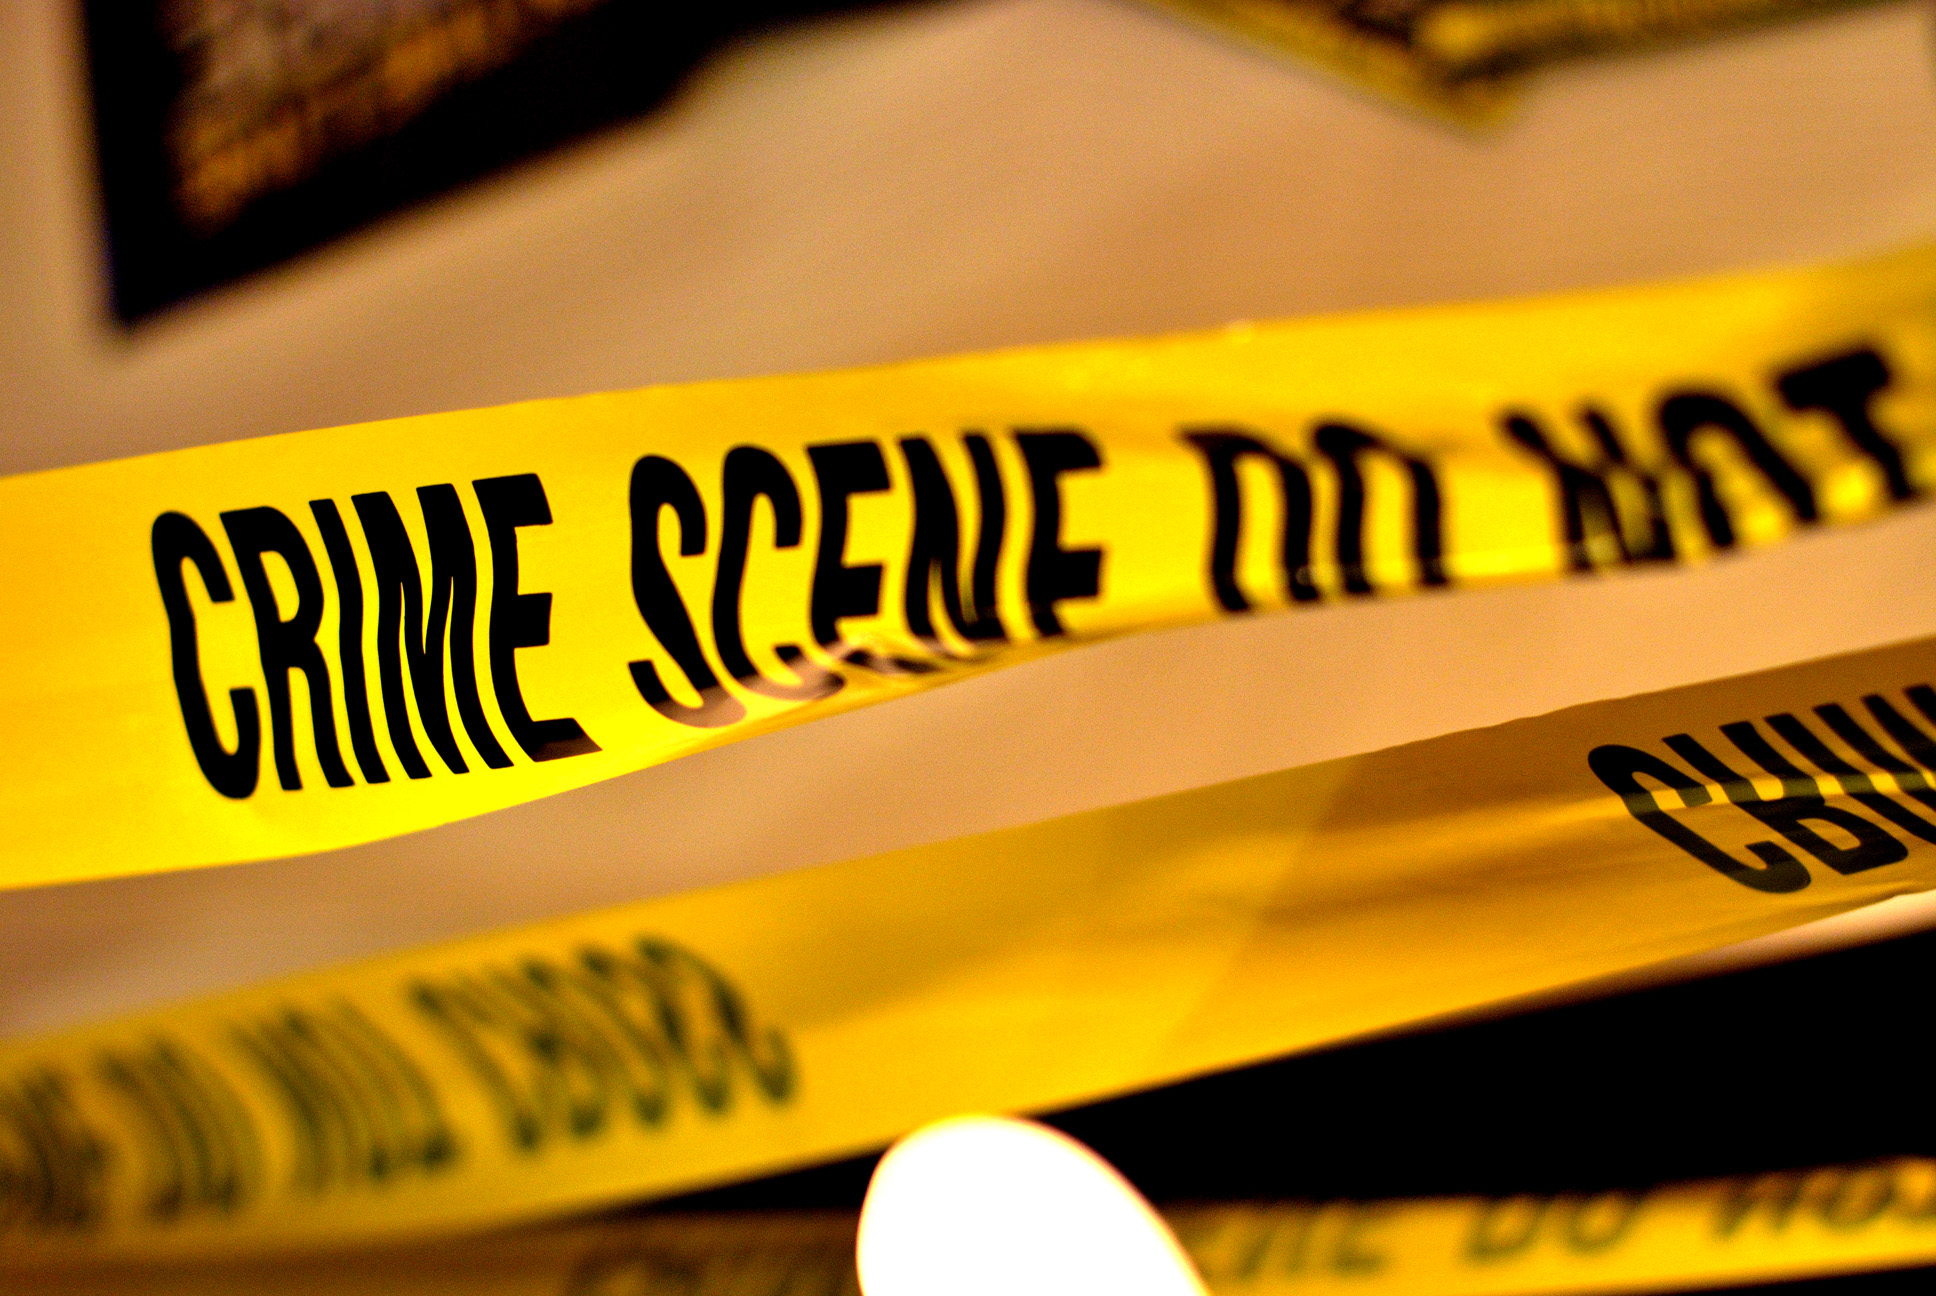 forensic and crime scene cleaning service in welling, bexley, london and the south east